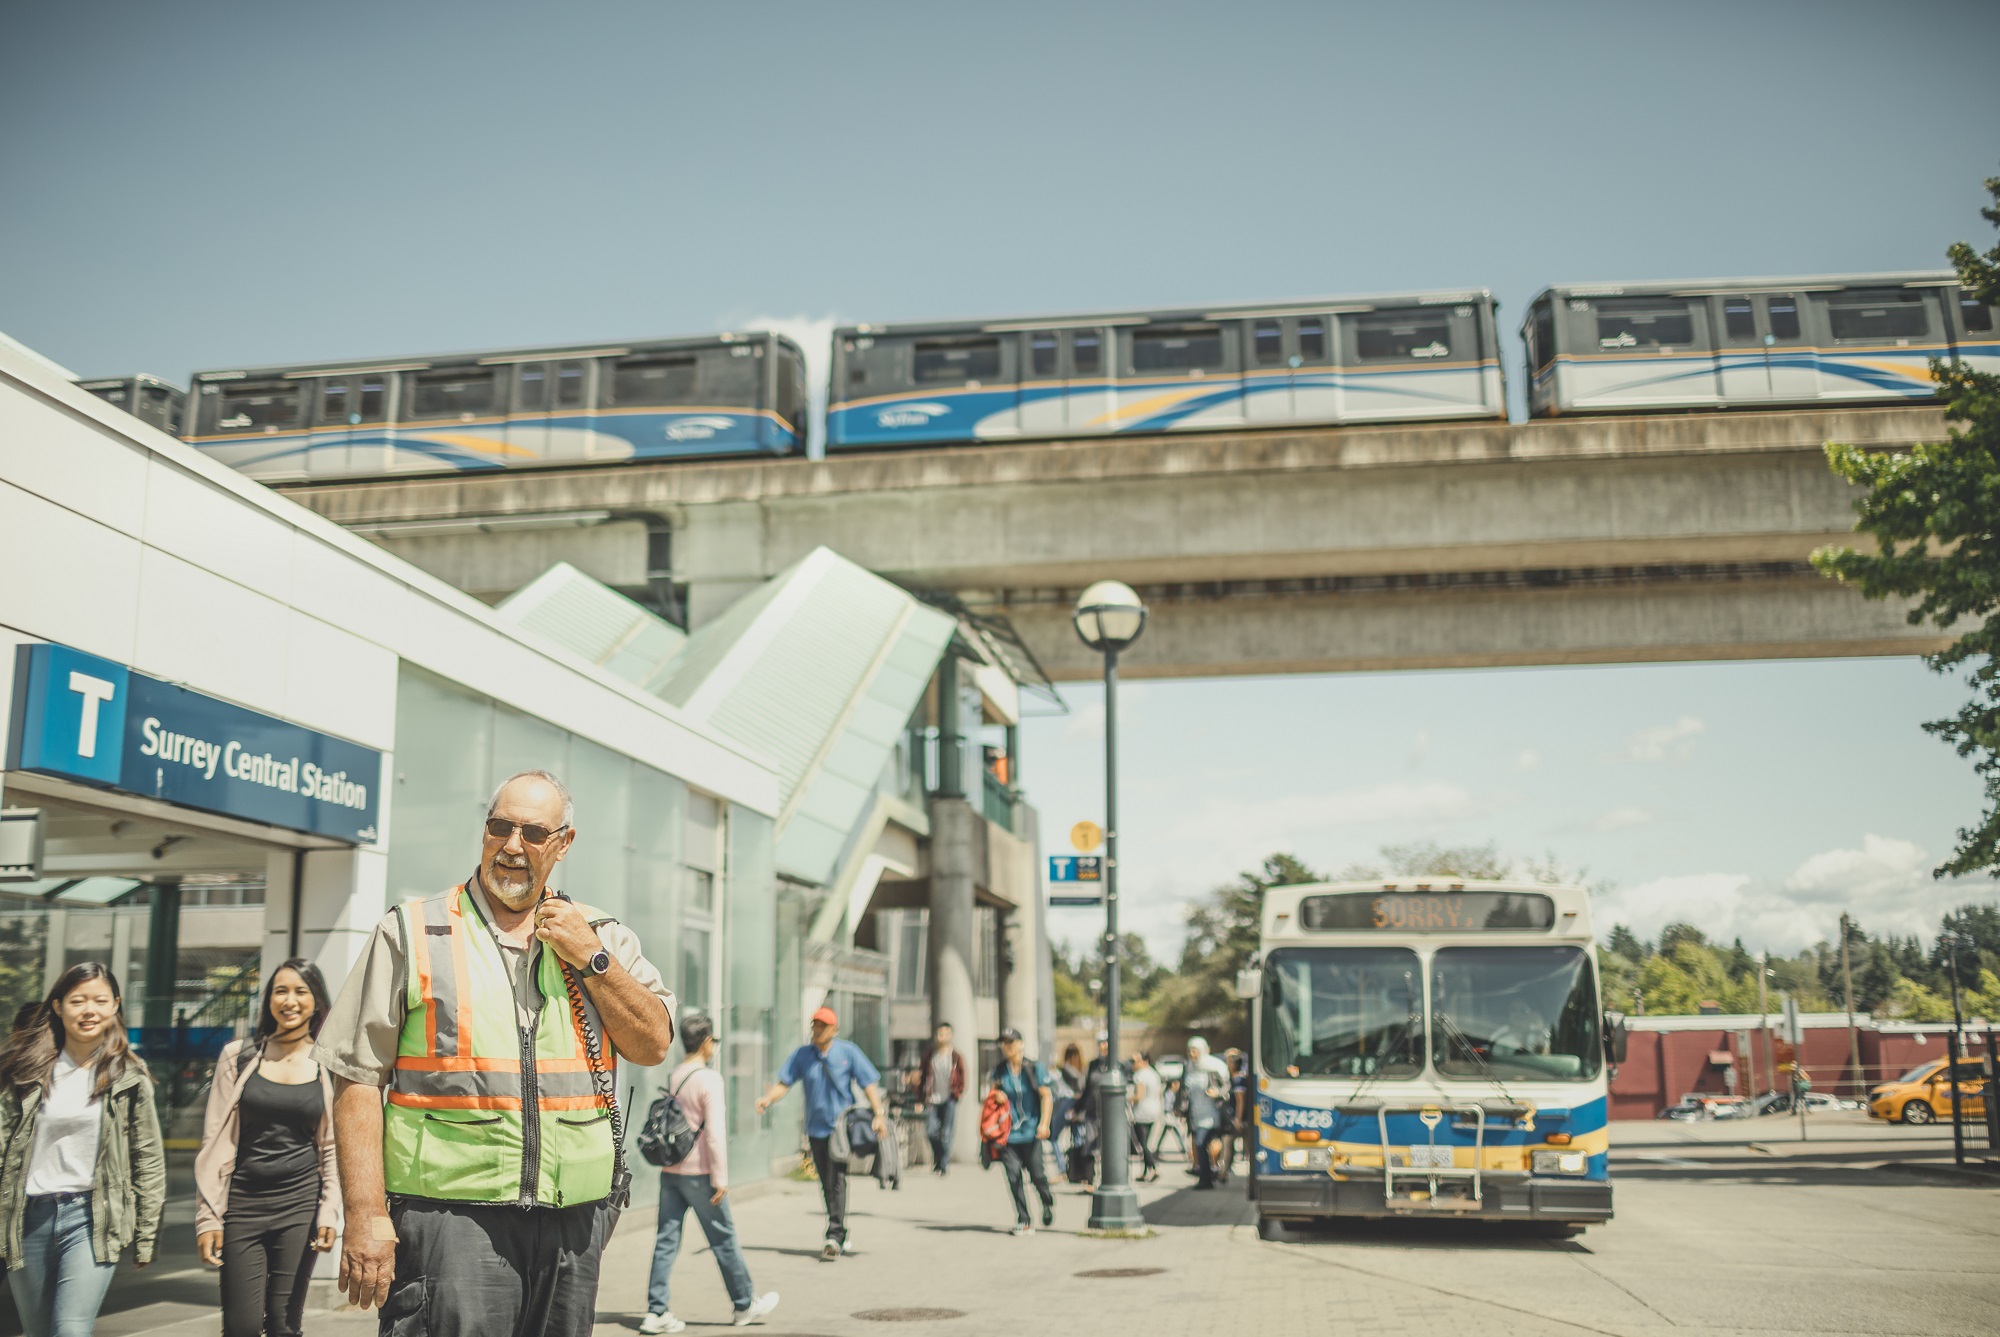 Man in a high vis vest stands in front of Surrey Central Station with a bus and SkyTrain in the background